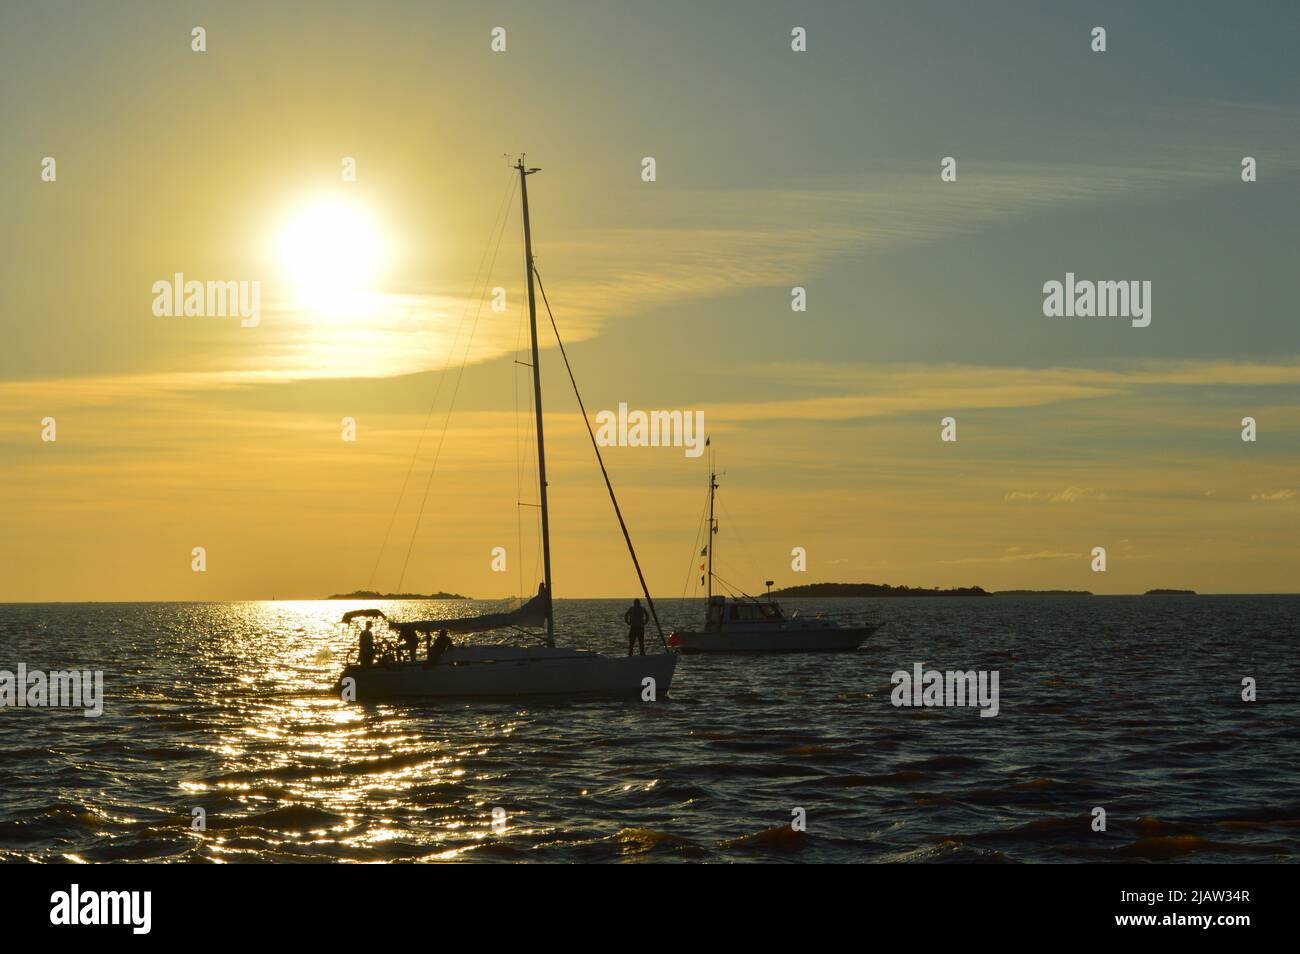 sailboat in sunset landscape on the river Stock Photo